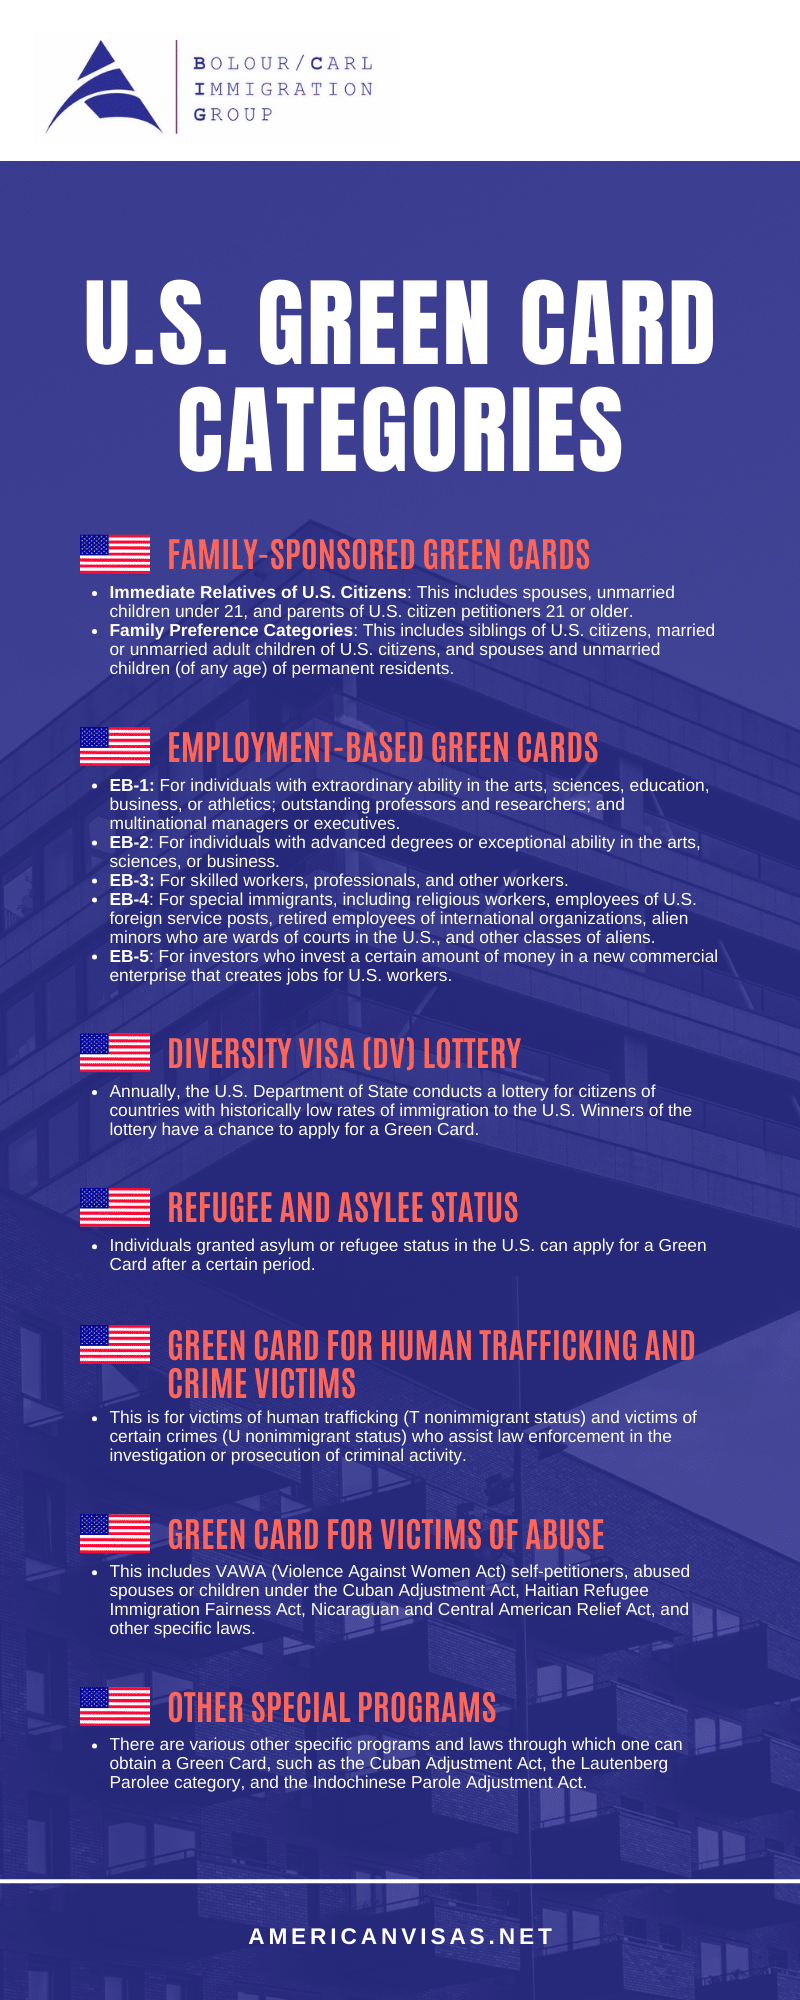 U.S. Greed Card Categories Infographic